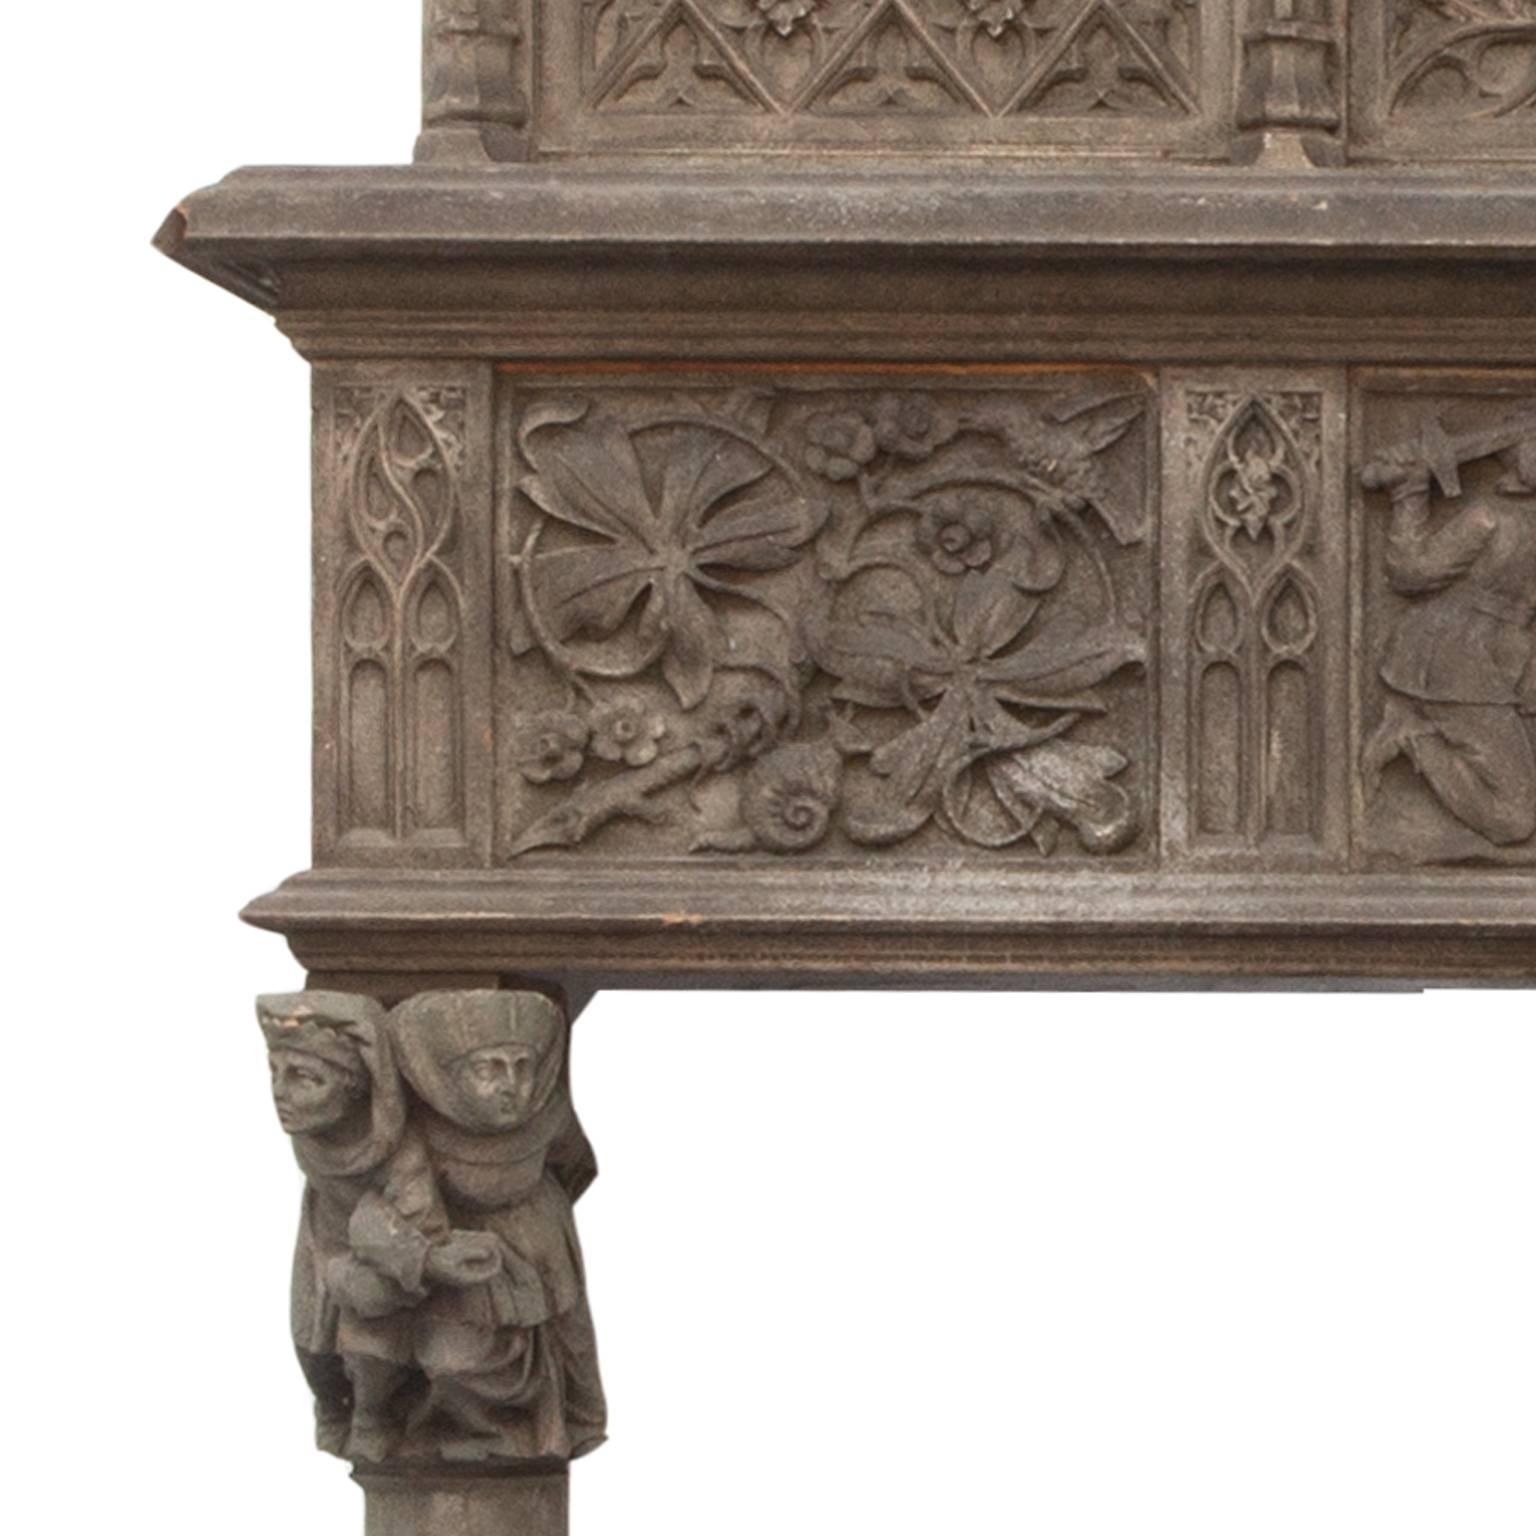 Extremely rare and beautifully hand-carved walnut English Victorian gothic fireplace surround and over-mantle-mantle. Originating from an Stately English Manor House in Somerset. Showing highly fine carved examples of figures and gestures in an aged